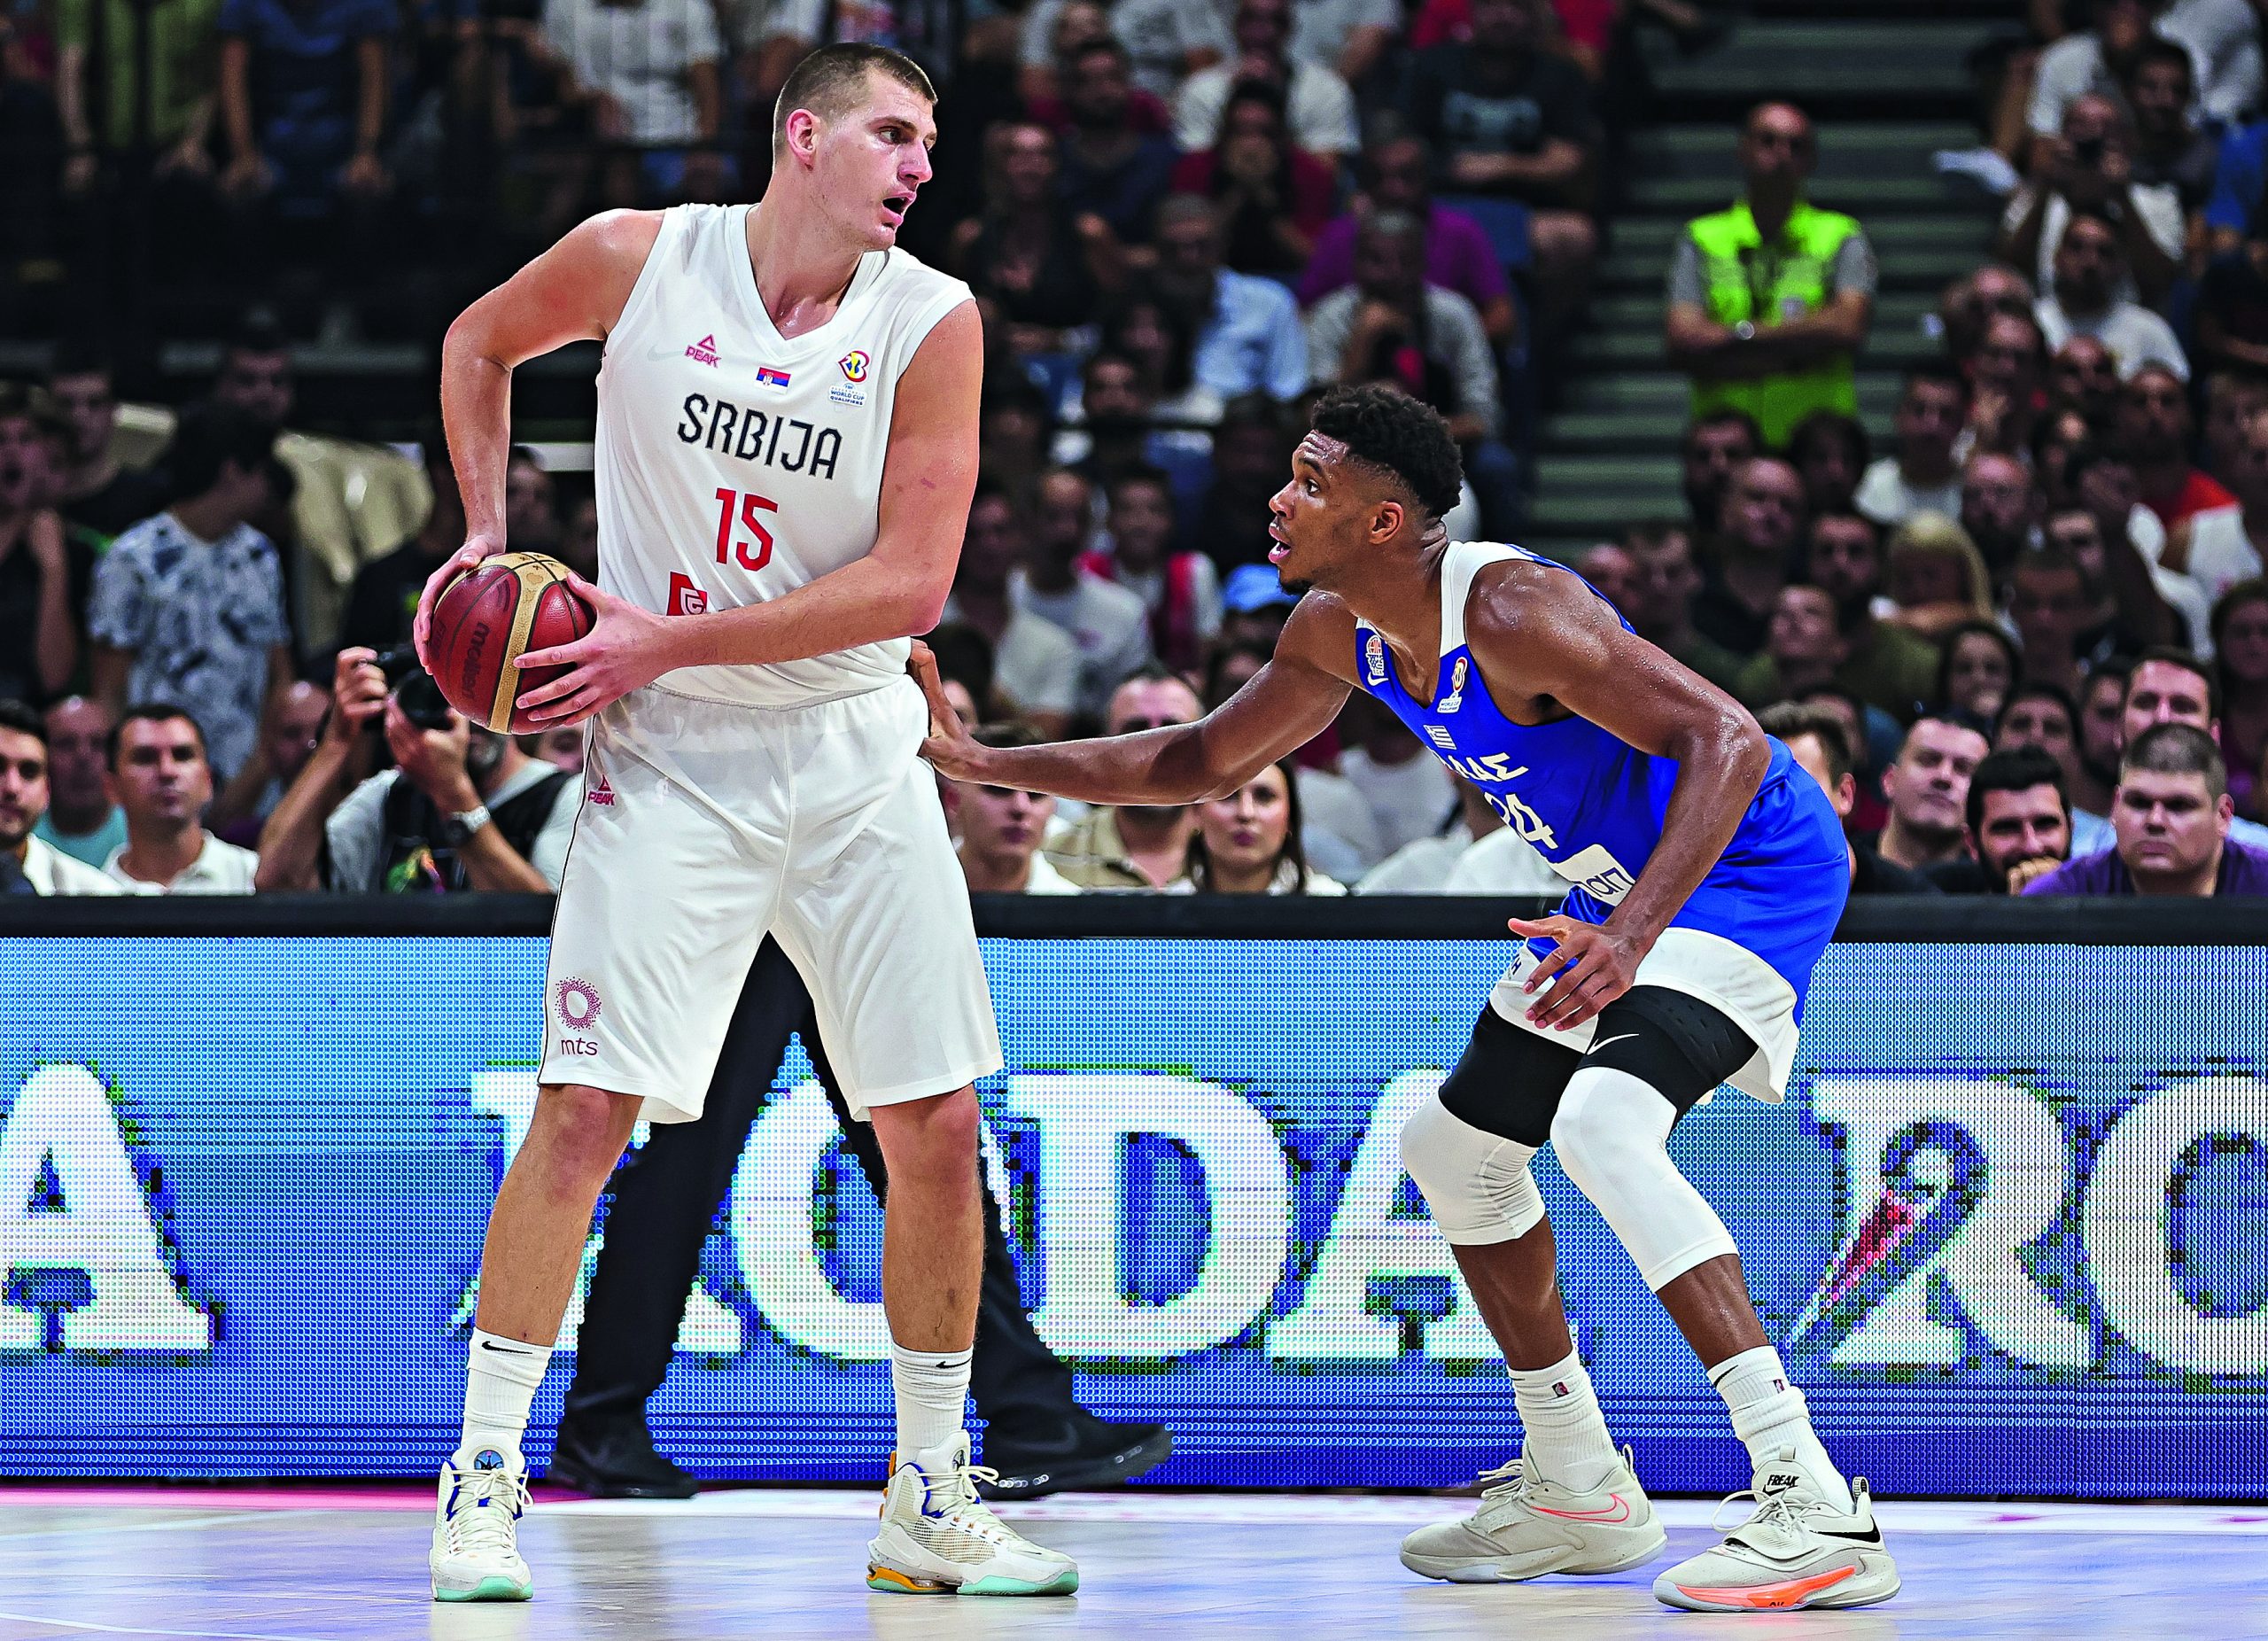 Spending summer at World Cup could benefit NBA players